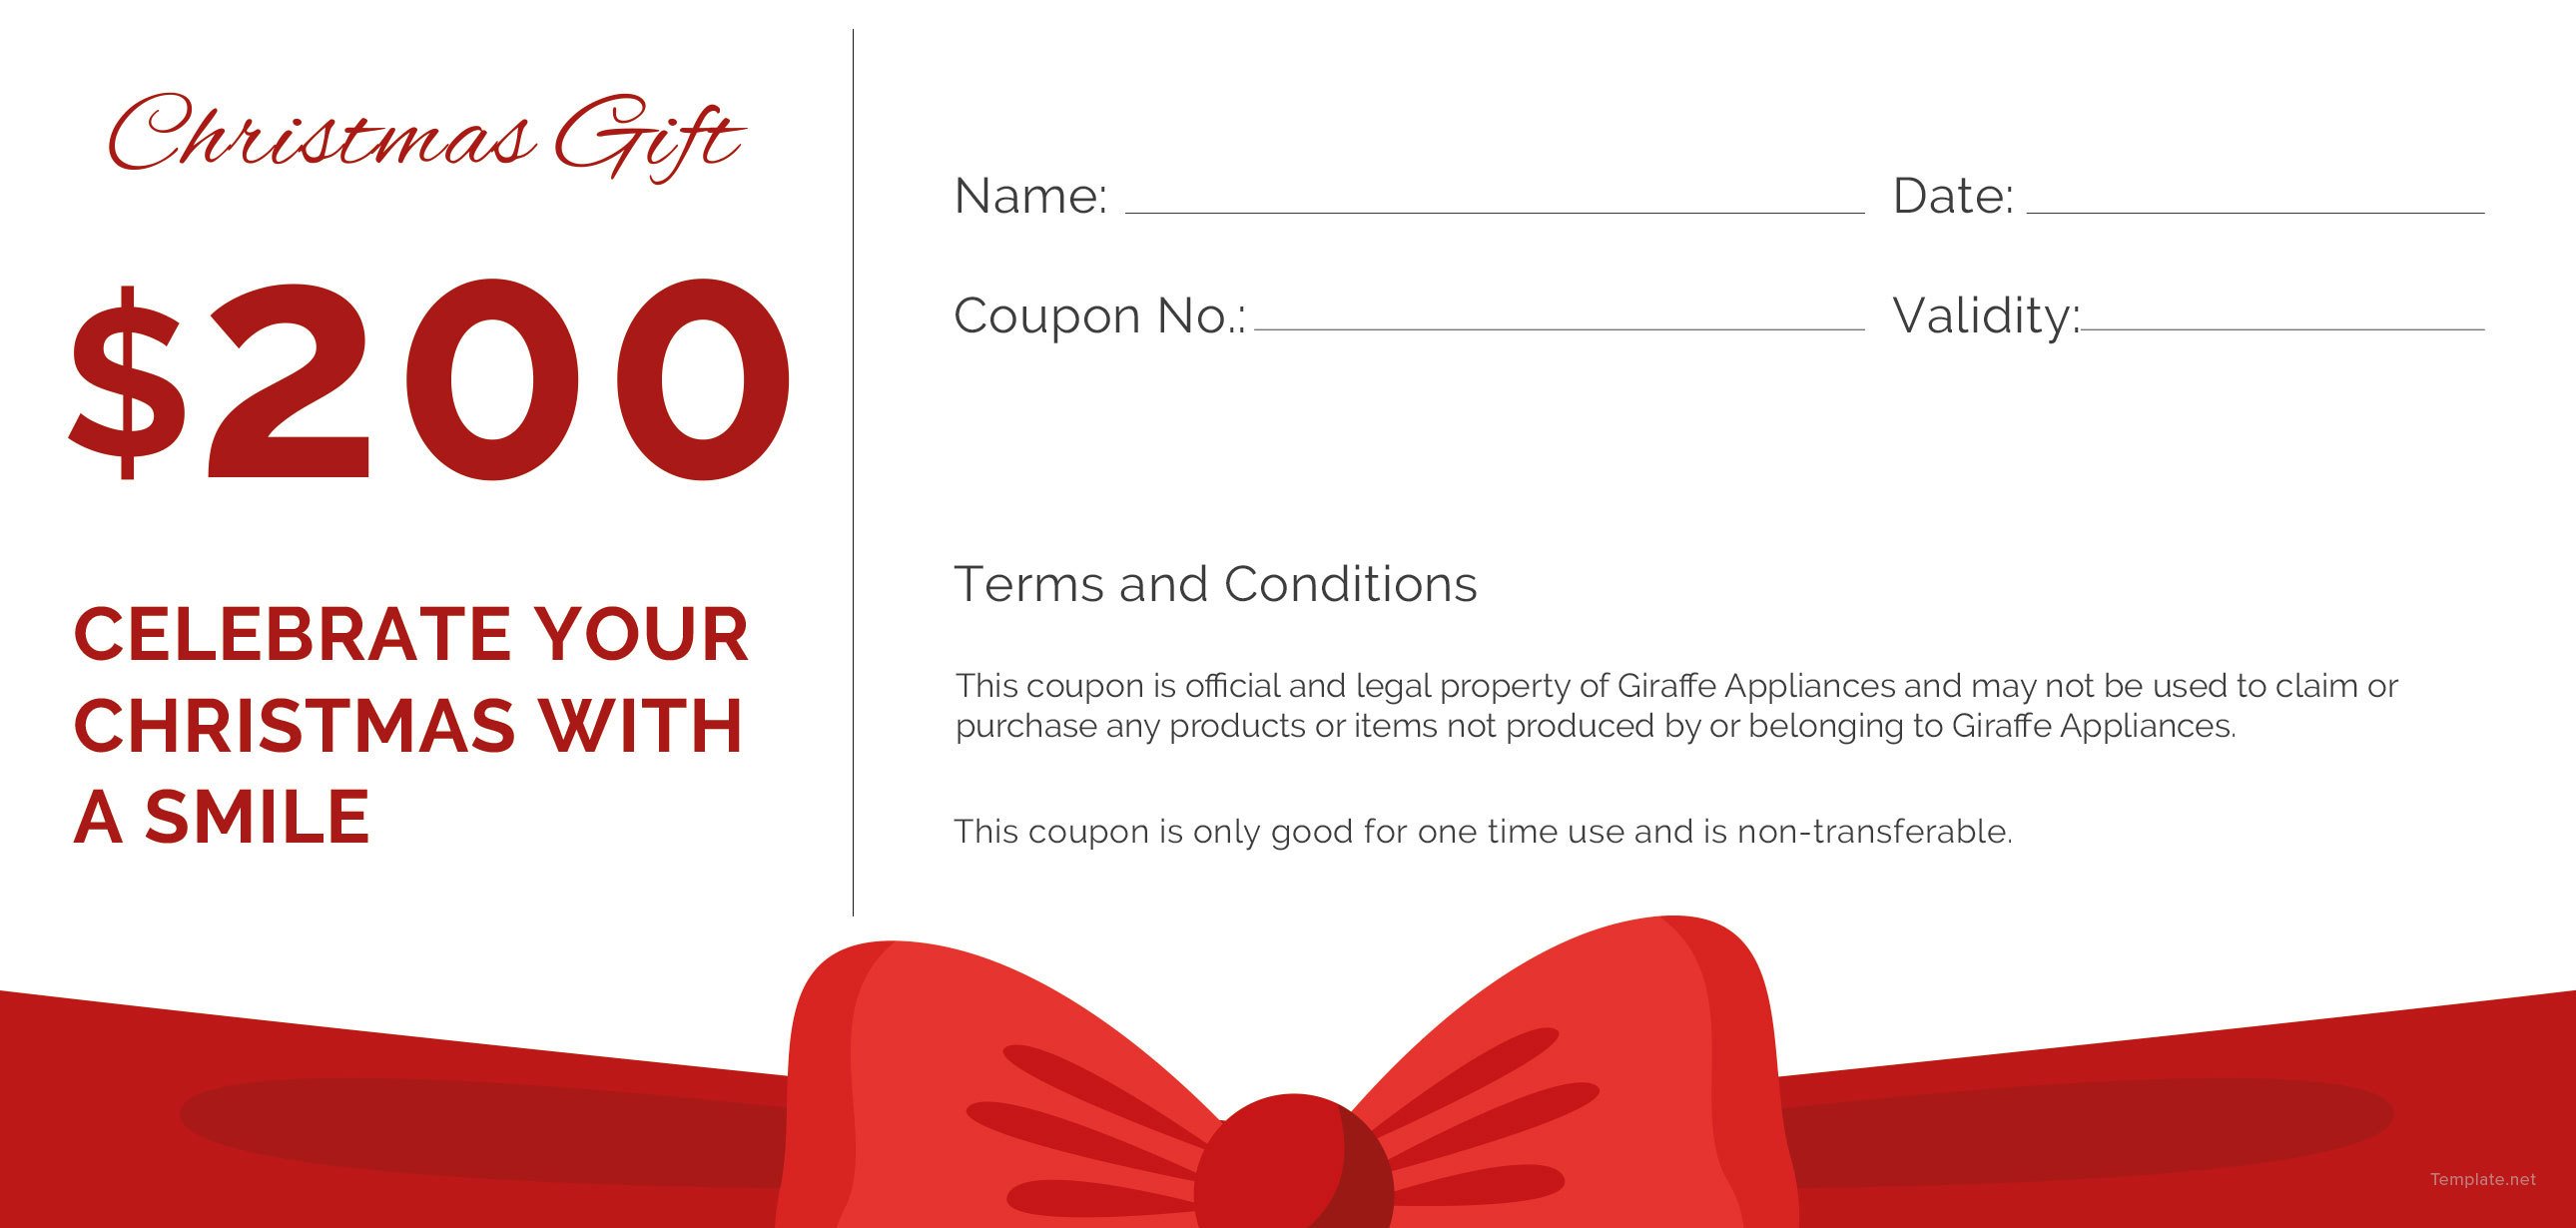 Free Christmas Gift Voucher Template In Adobe Photoshop Illustrator 